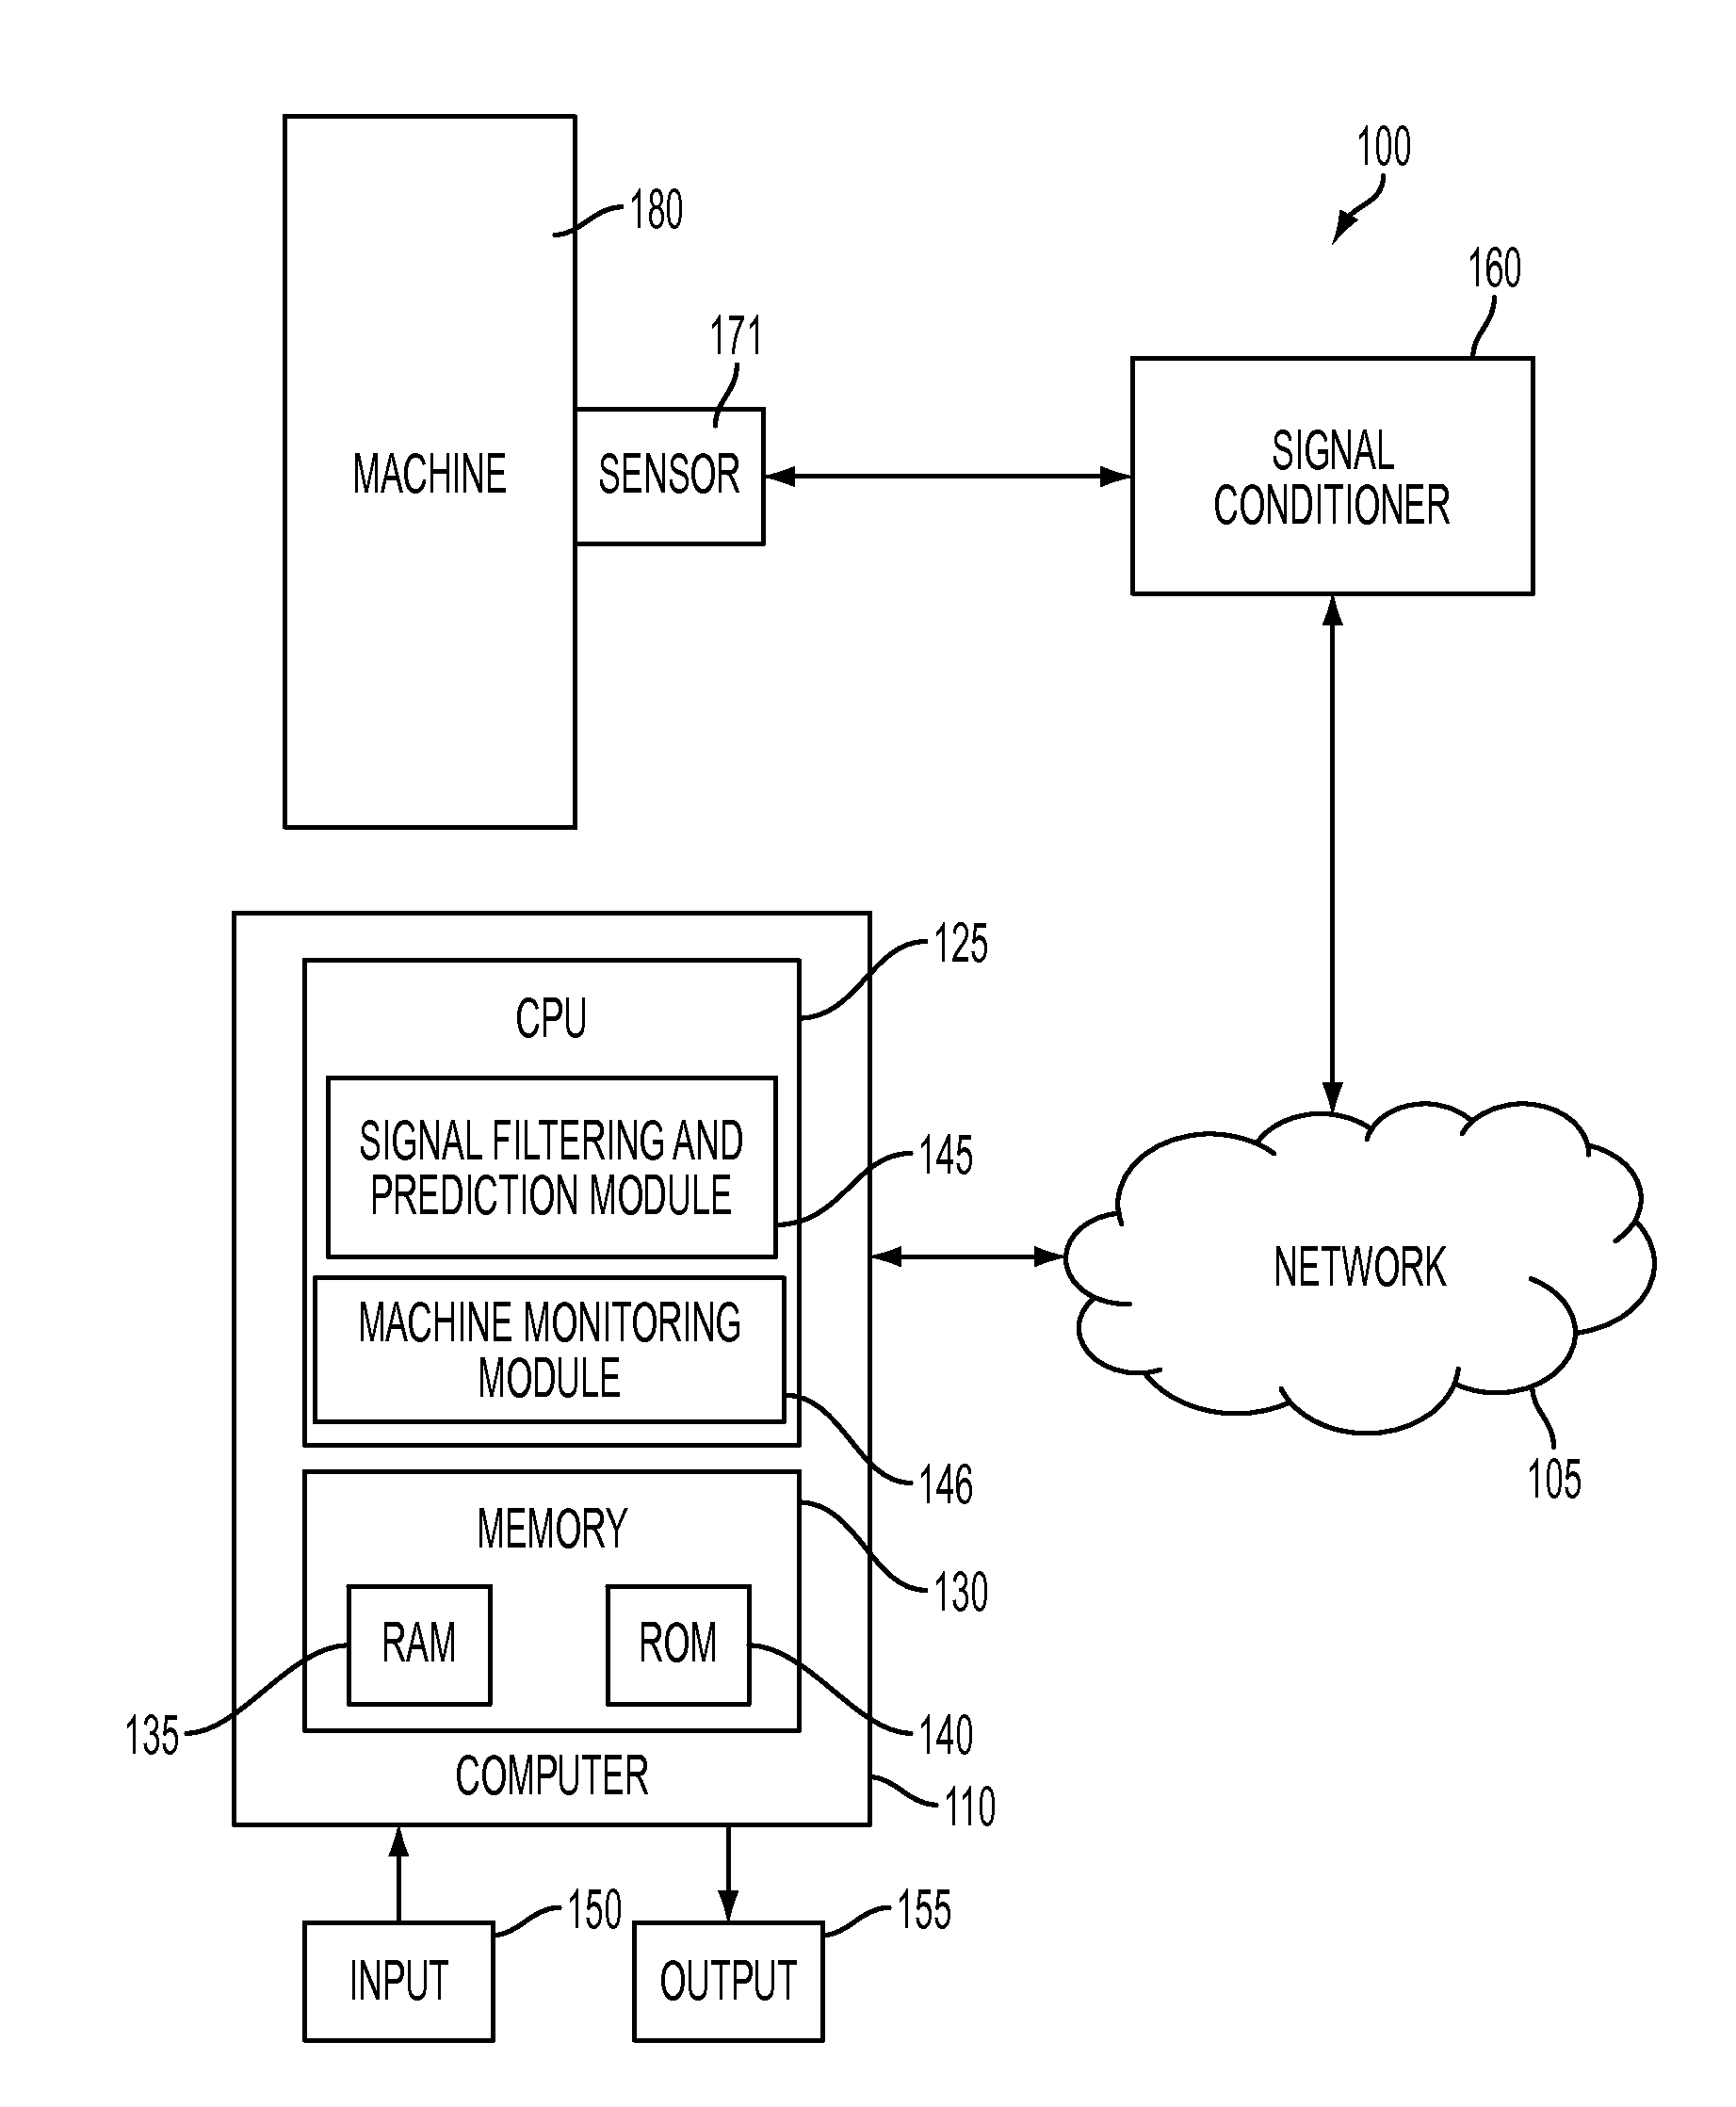 Robust Filtering And Prediction Using Switching Models For Machine Condition Monitoring